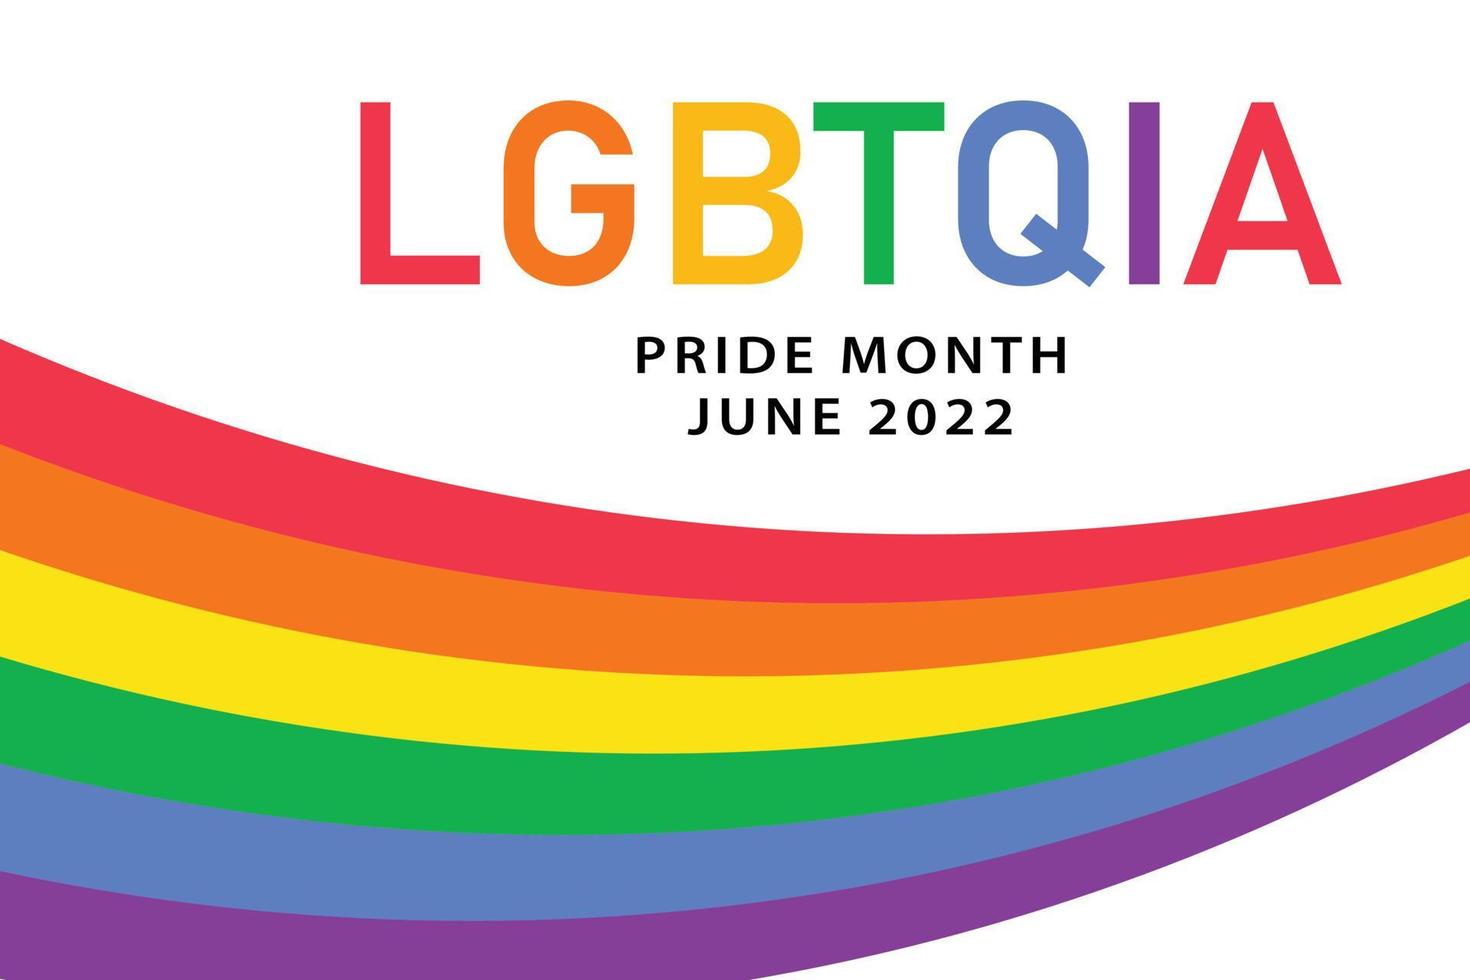 LGBTQIA pride month June 2022 - horizontal poster template with rainbow flag, LGBT symbol. Vector banner design for social media